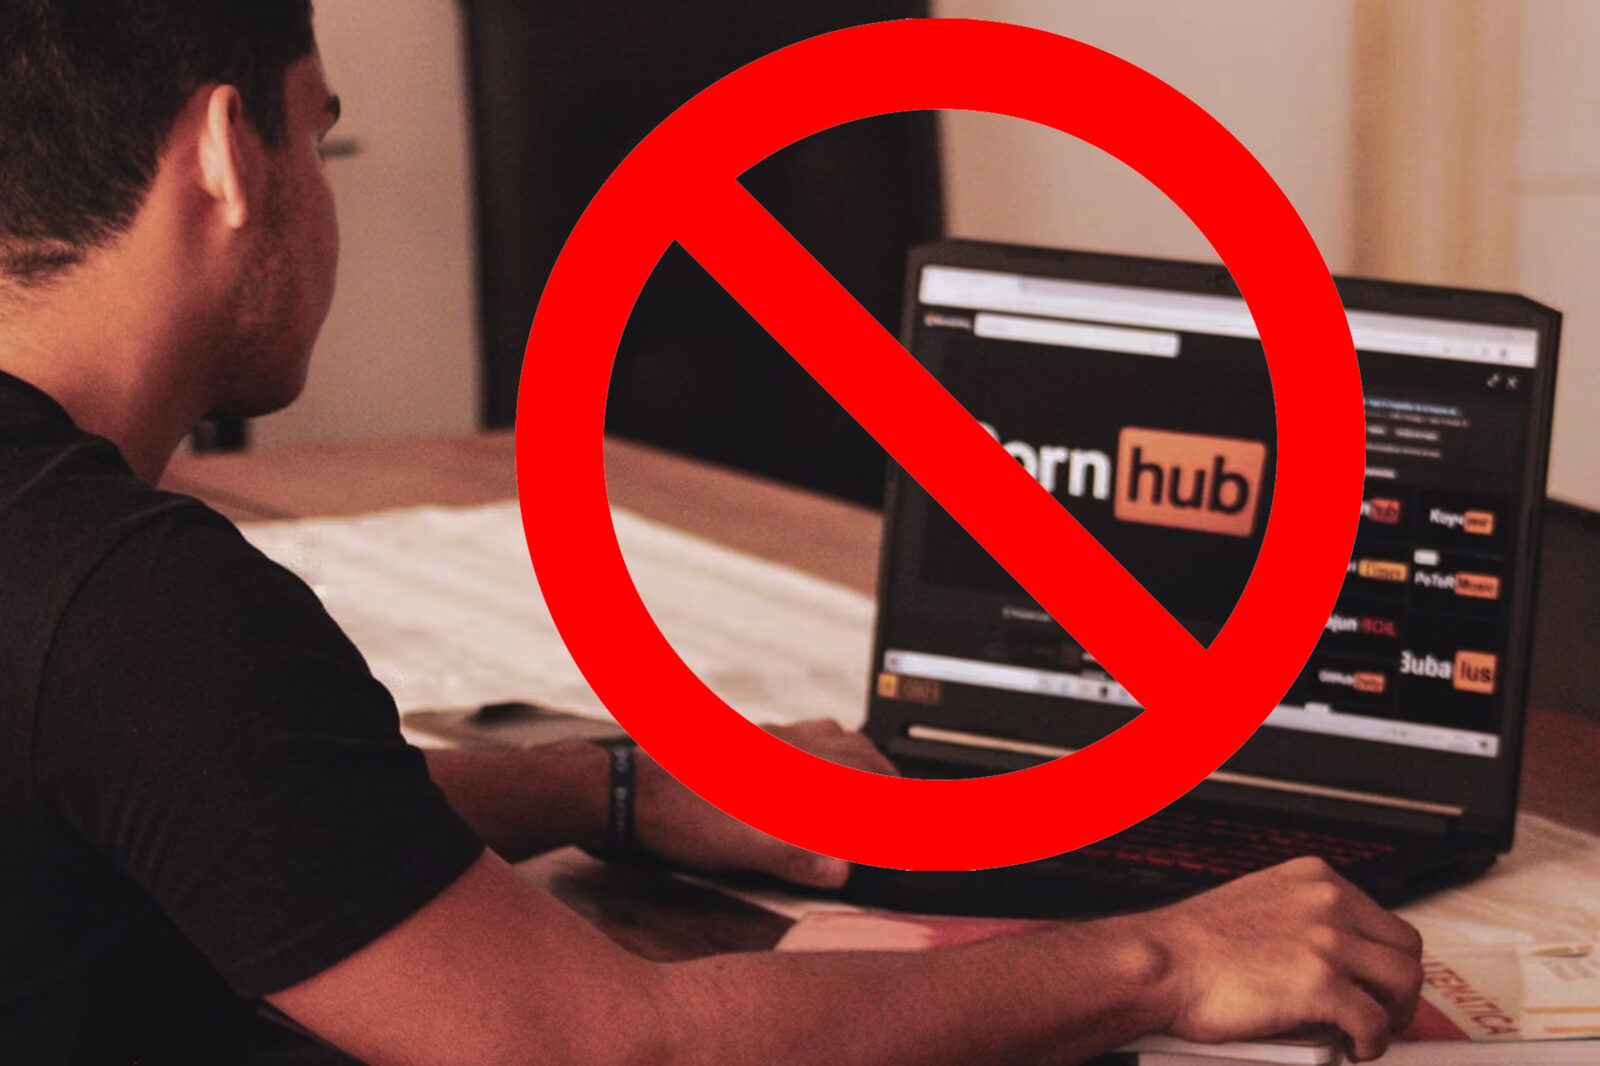 Ponhurb - Pornhub Blocks Access In Utah Because of State's New Age Verification Law -  RELEVANT